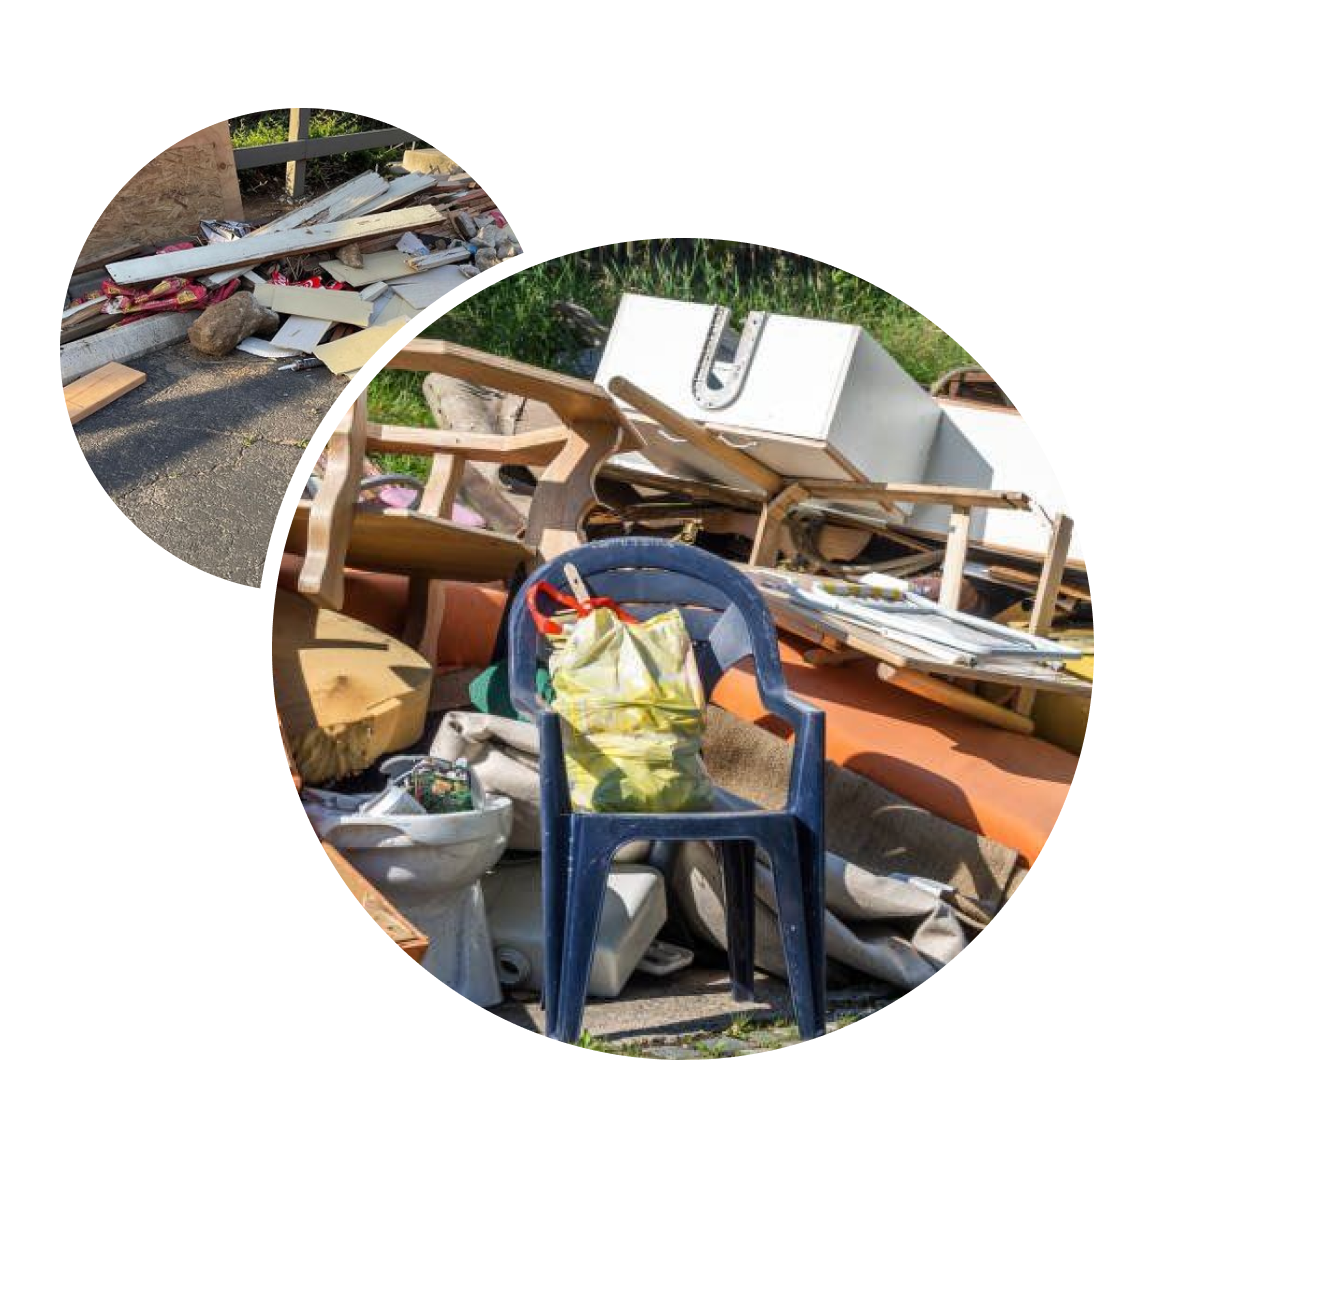 trusted junk removal company in san diego and north county